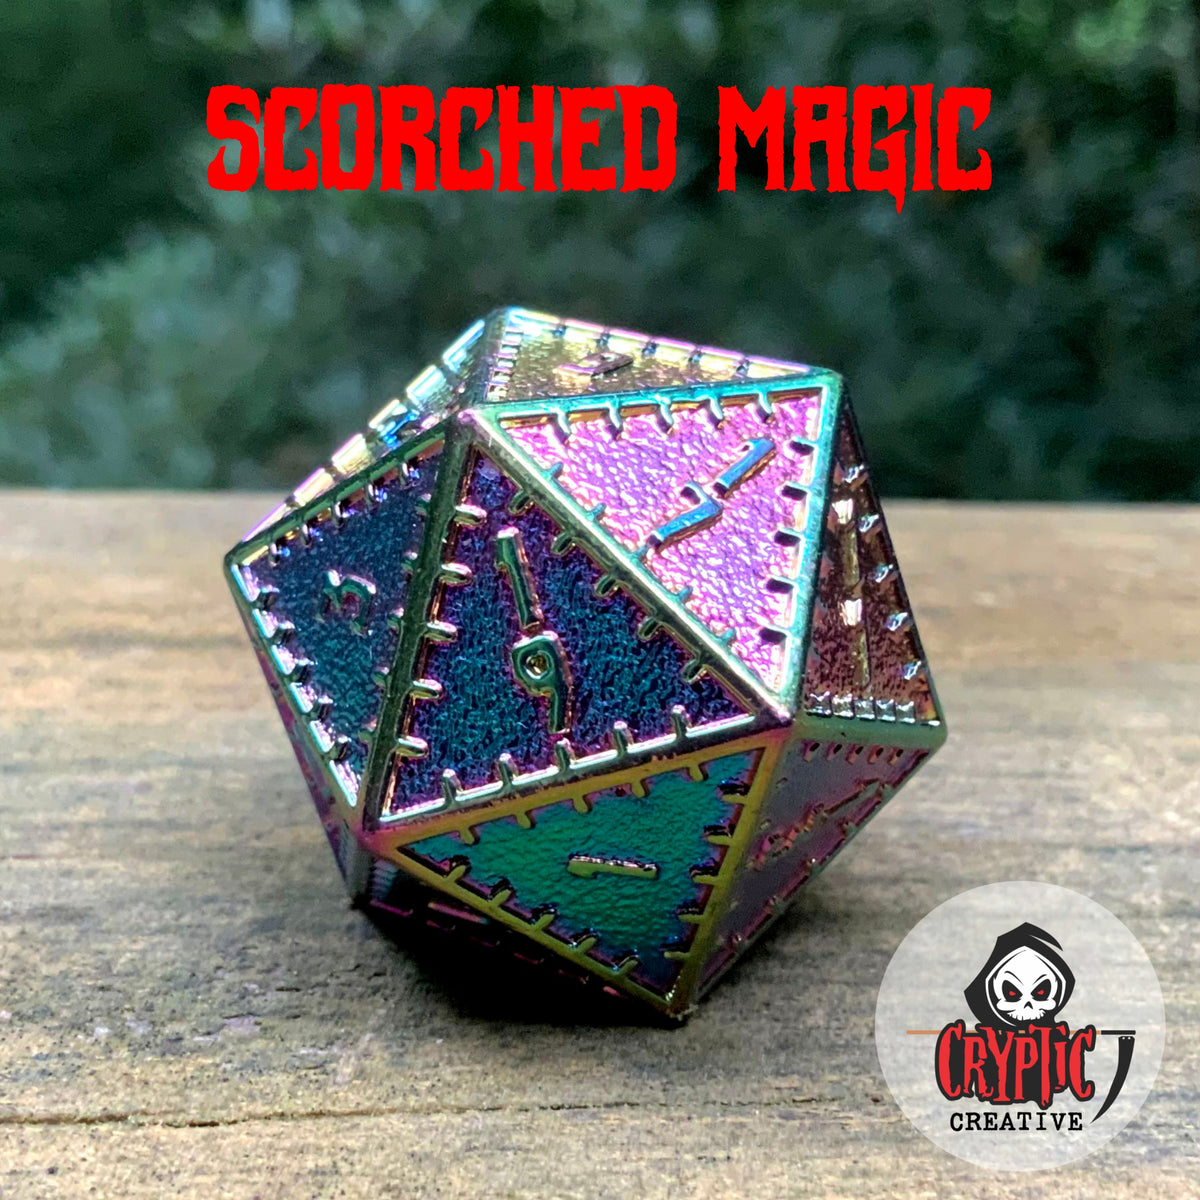 Scorched Magic - 35mm d20-Cryptic Creative-Metal Dice-DND Dice-Large Dice-D&amp;D Dice-Cryptic Creative